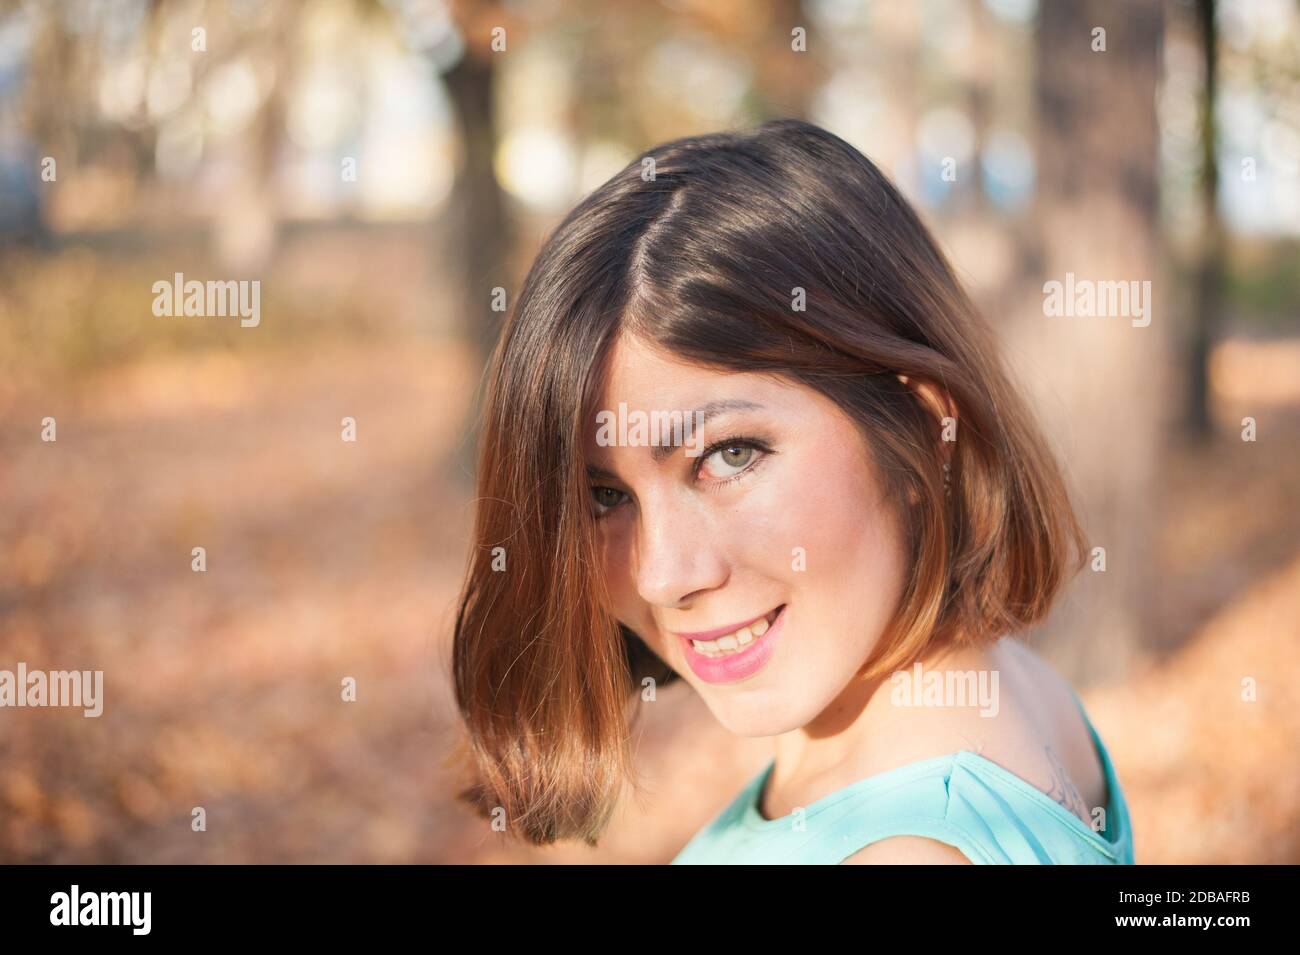 pretty dark-haired girl in blue smiles, looks over her shoulder in the park in autumn Stock Photo